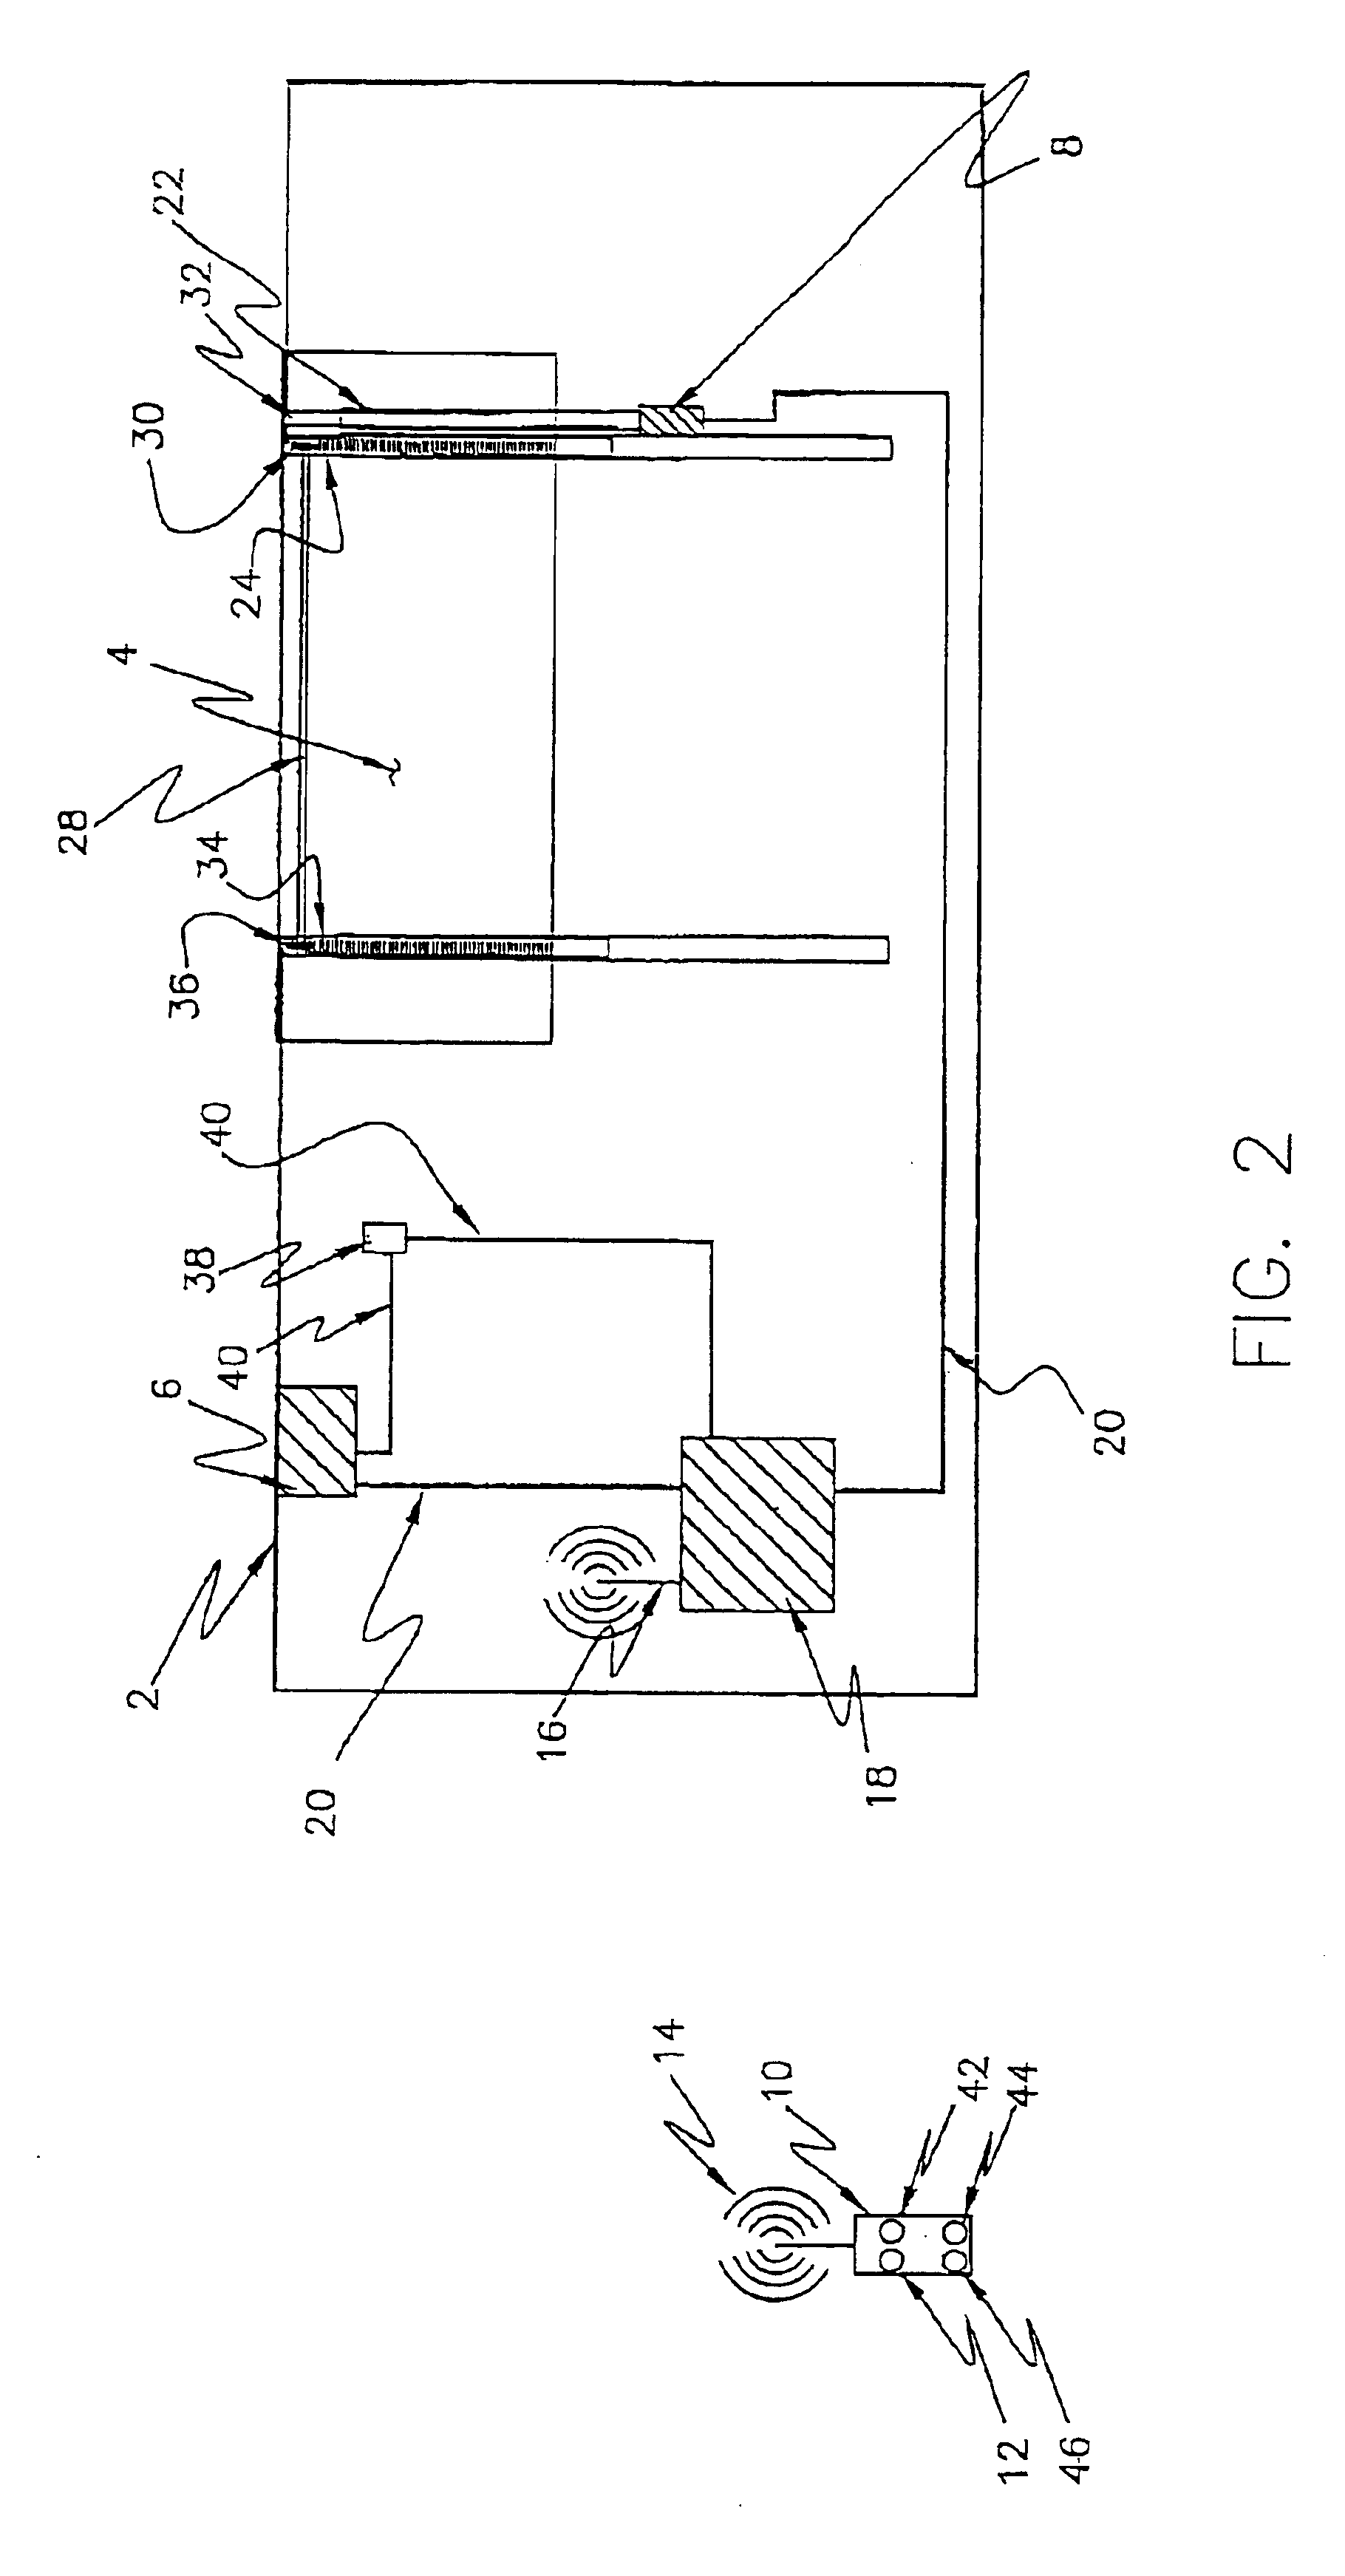 Motor control for slide-out room in mobile living quarters